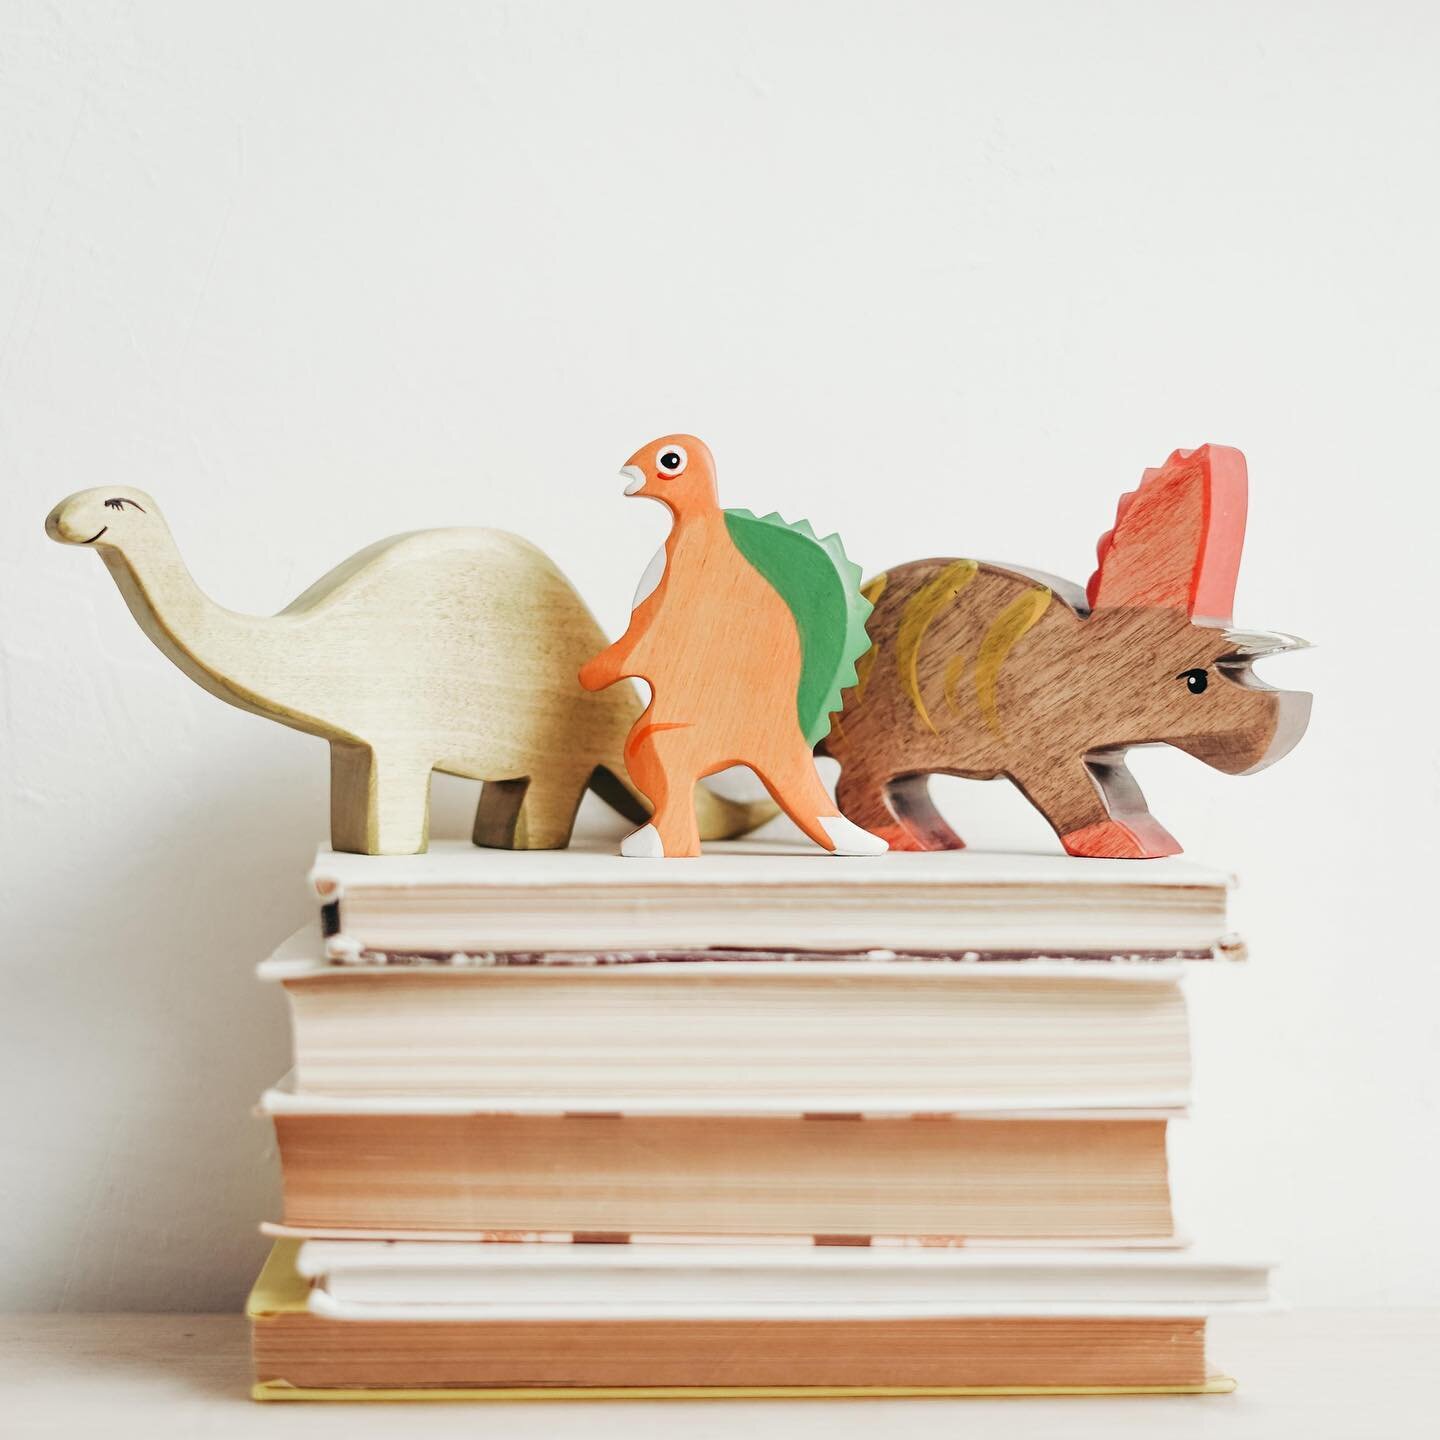 We love dinosaurs! From books like &ldquo;Dinosaurumpus&rdquo; to &ldquo;Dinosnores&rdquo;, everyone loves stories and pretend play on these fascinating creatures. 

But if you&rsquo;re looking to create a meaningful, emergent curriculum for young ch